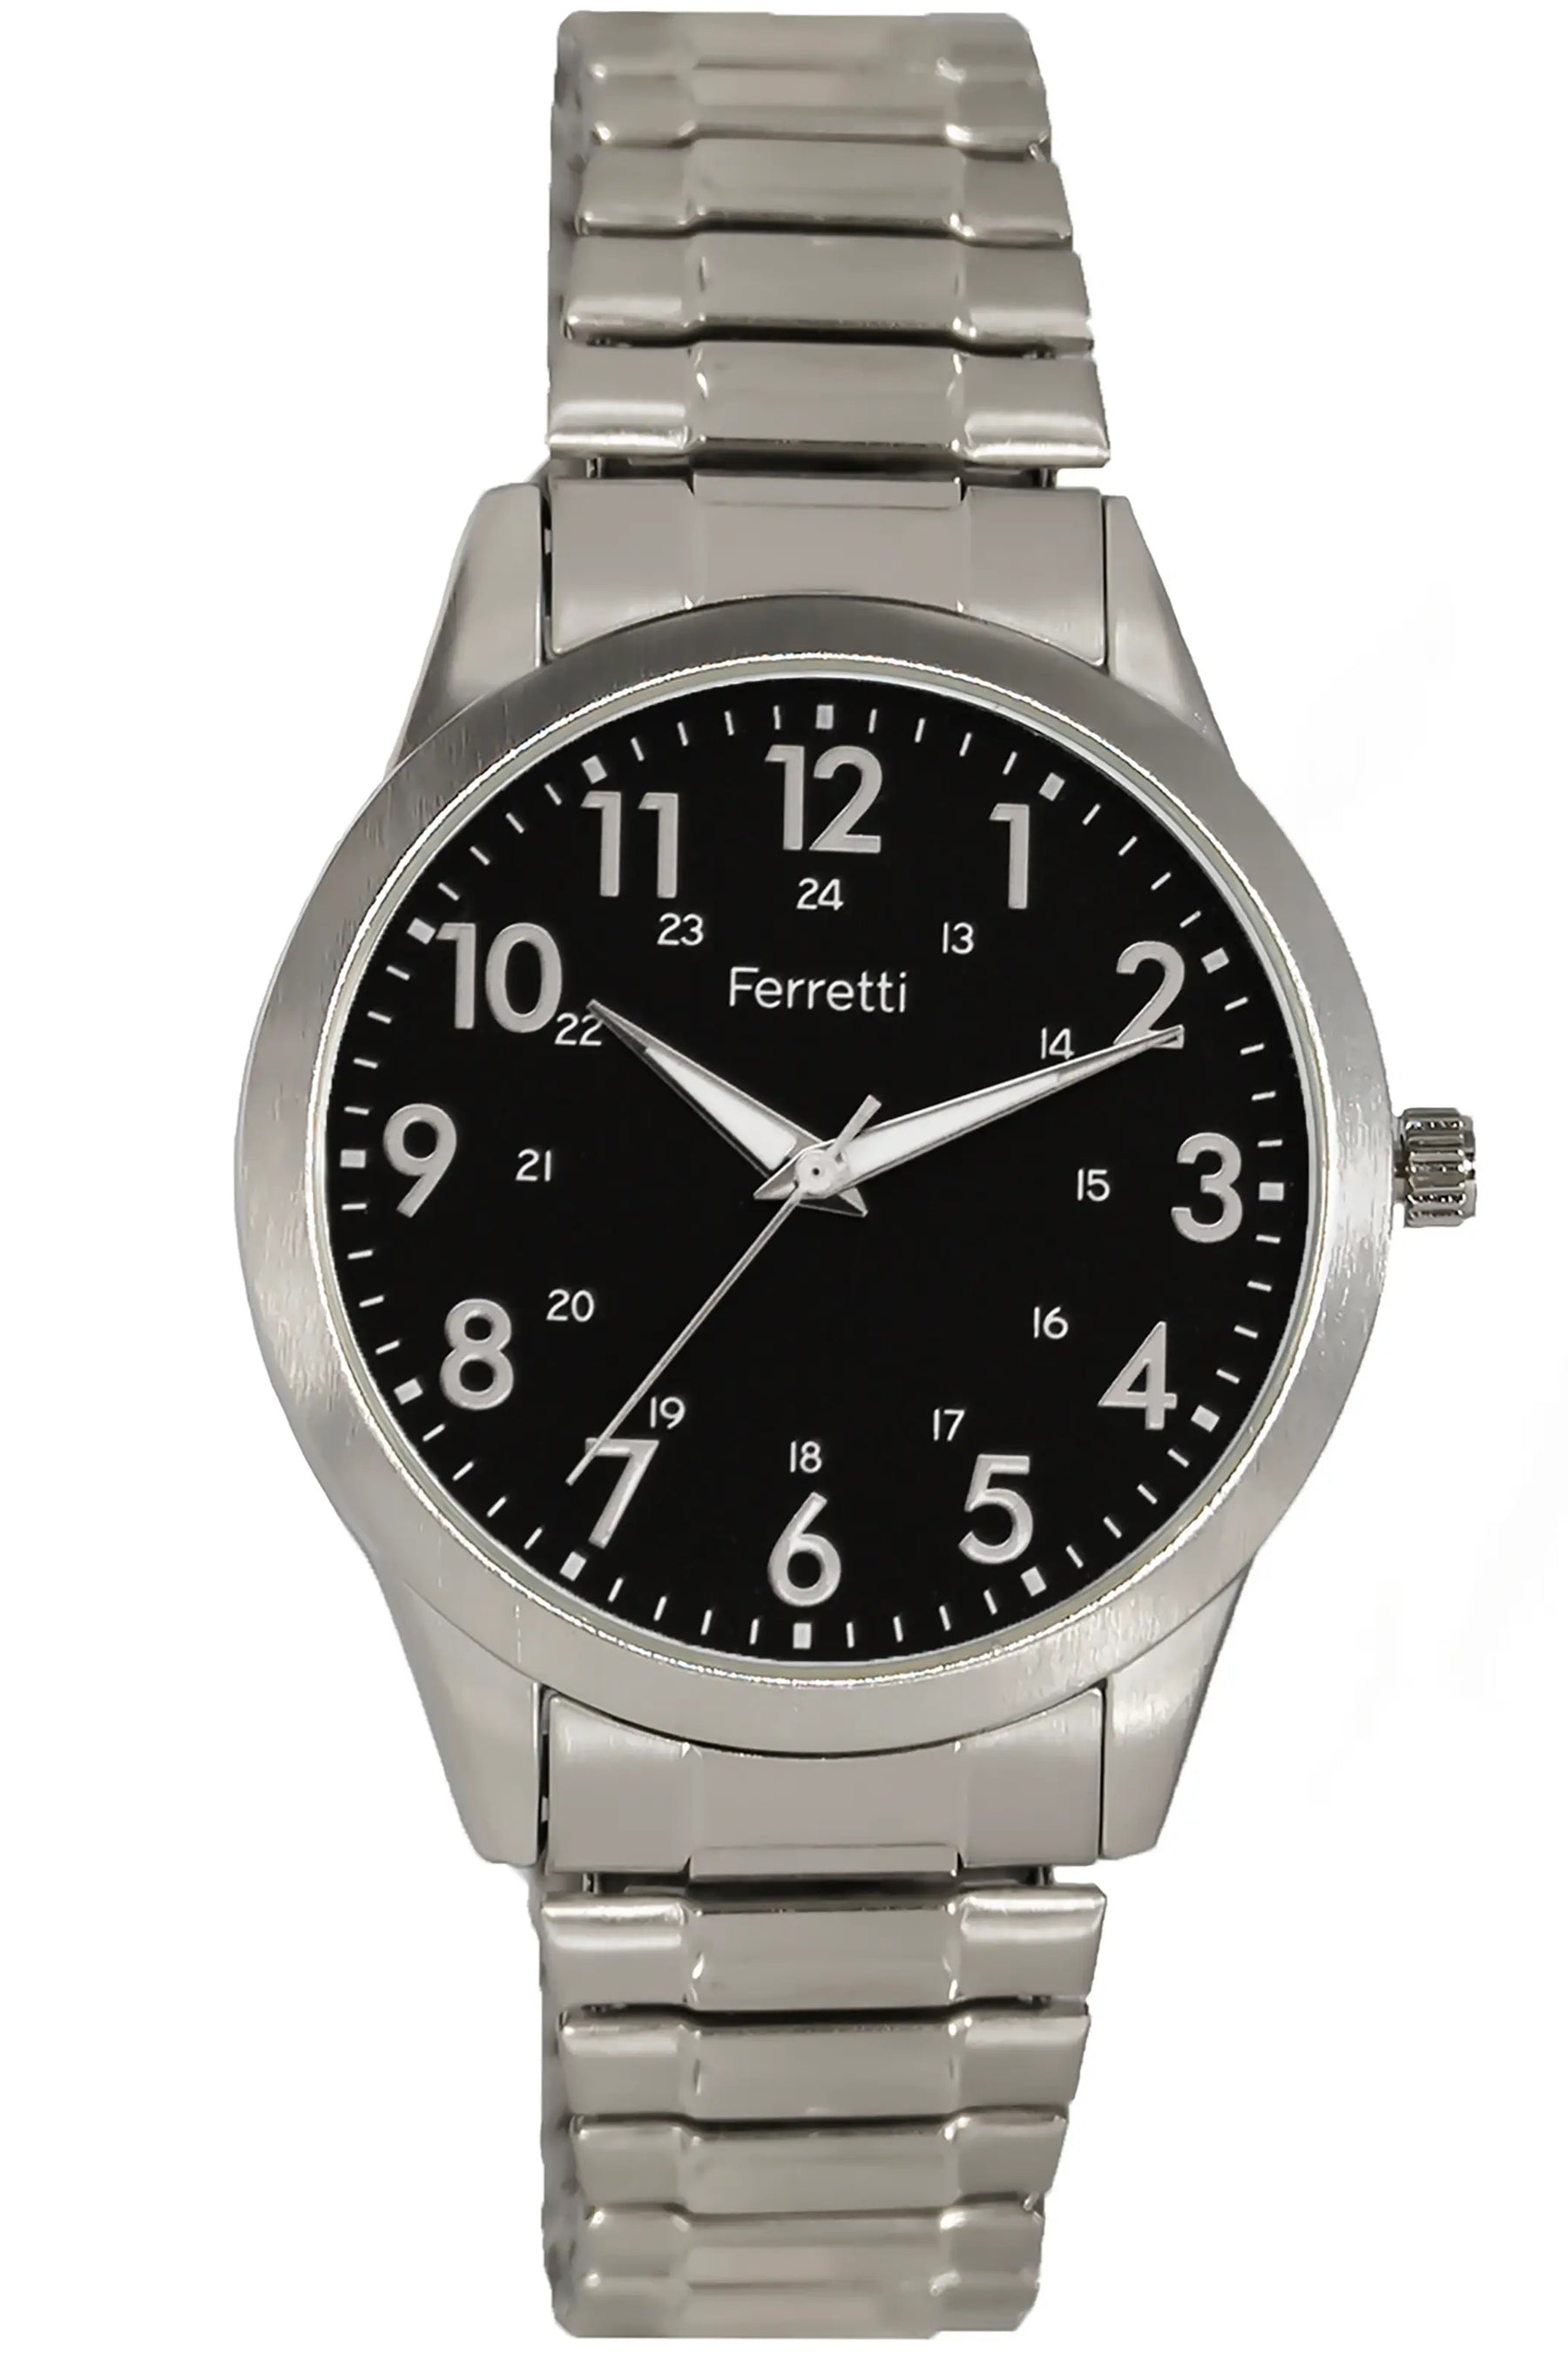 Marciano - Ferretti Men's Silver-Tone Stainless Steel Band Watch, 12 & 24 Hour Face, Silver